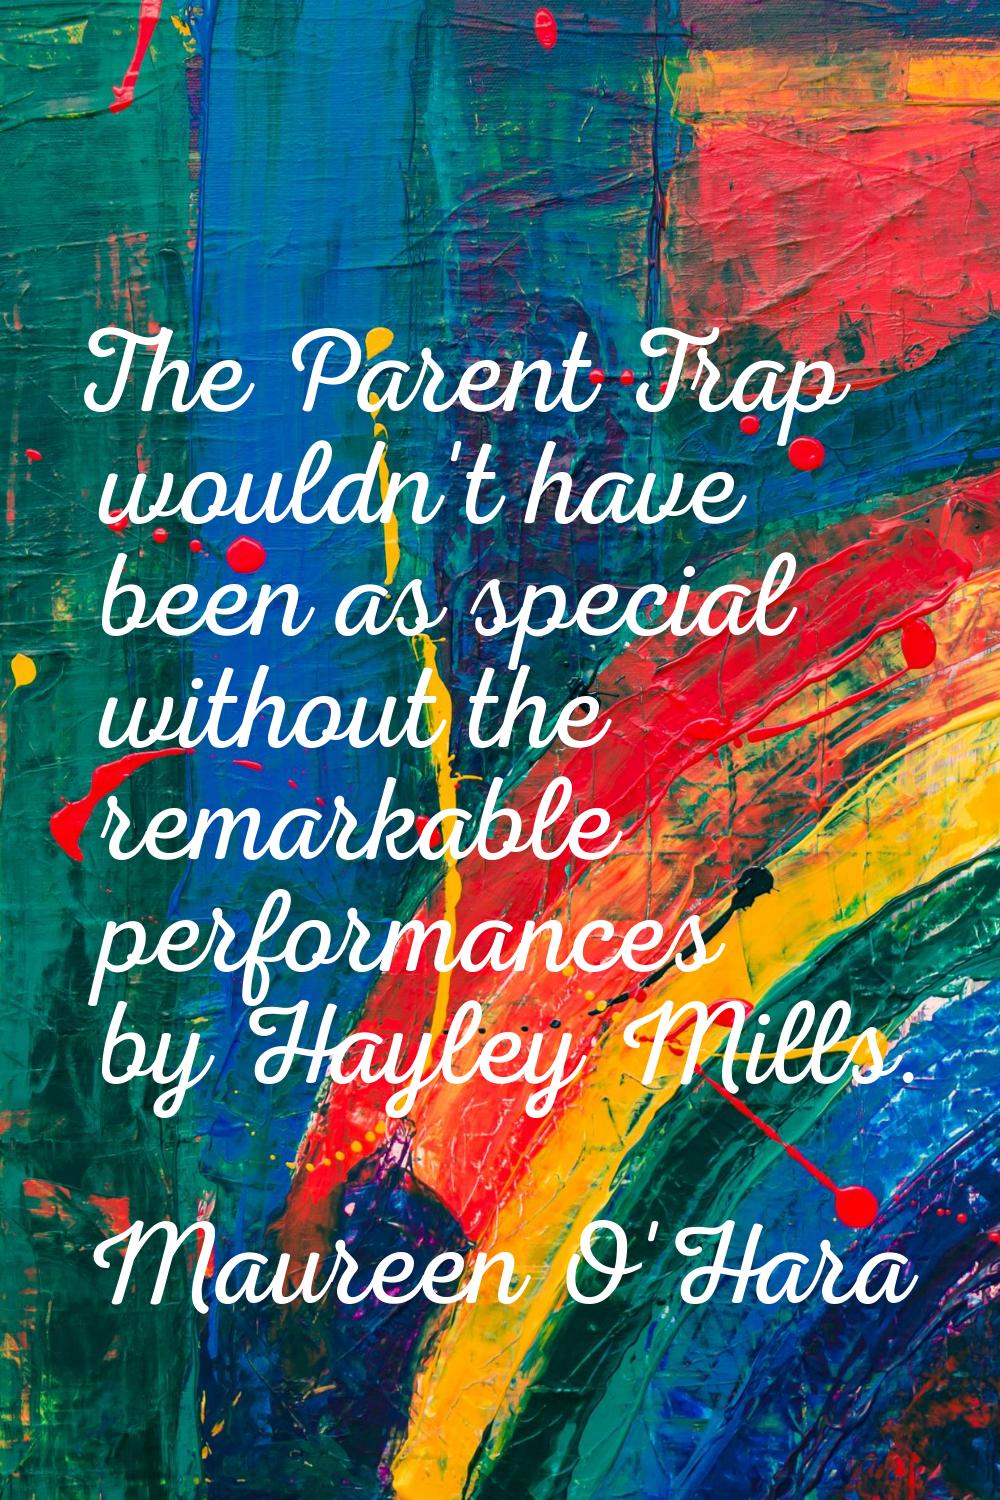 The Parent Trap wouldn't have been as special without the remarkable performances by Hayley Mills.